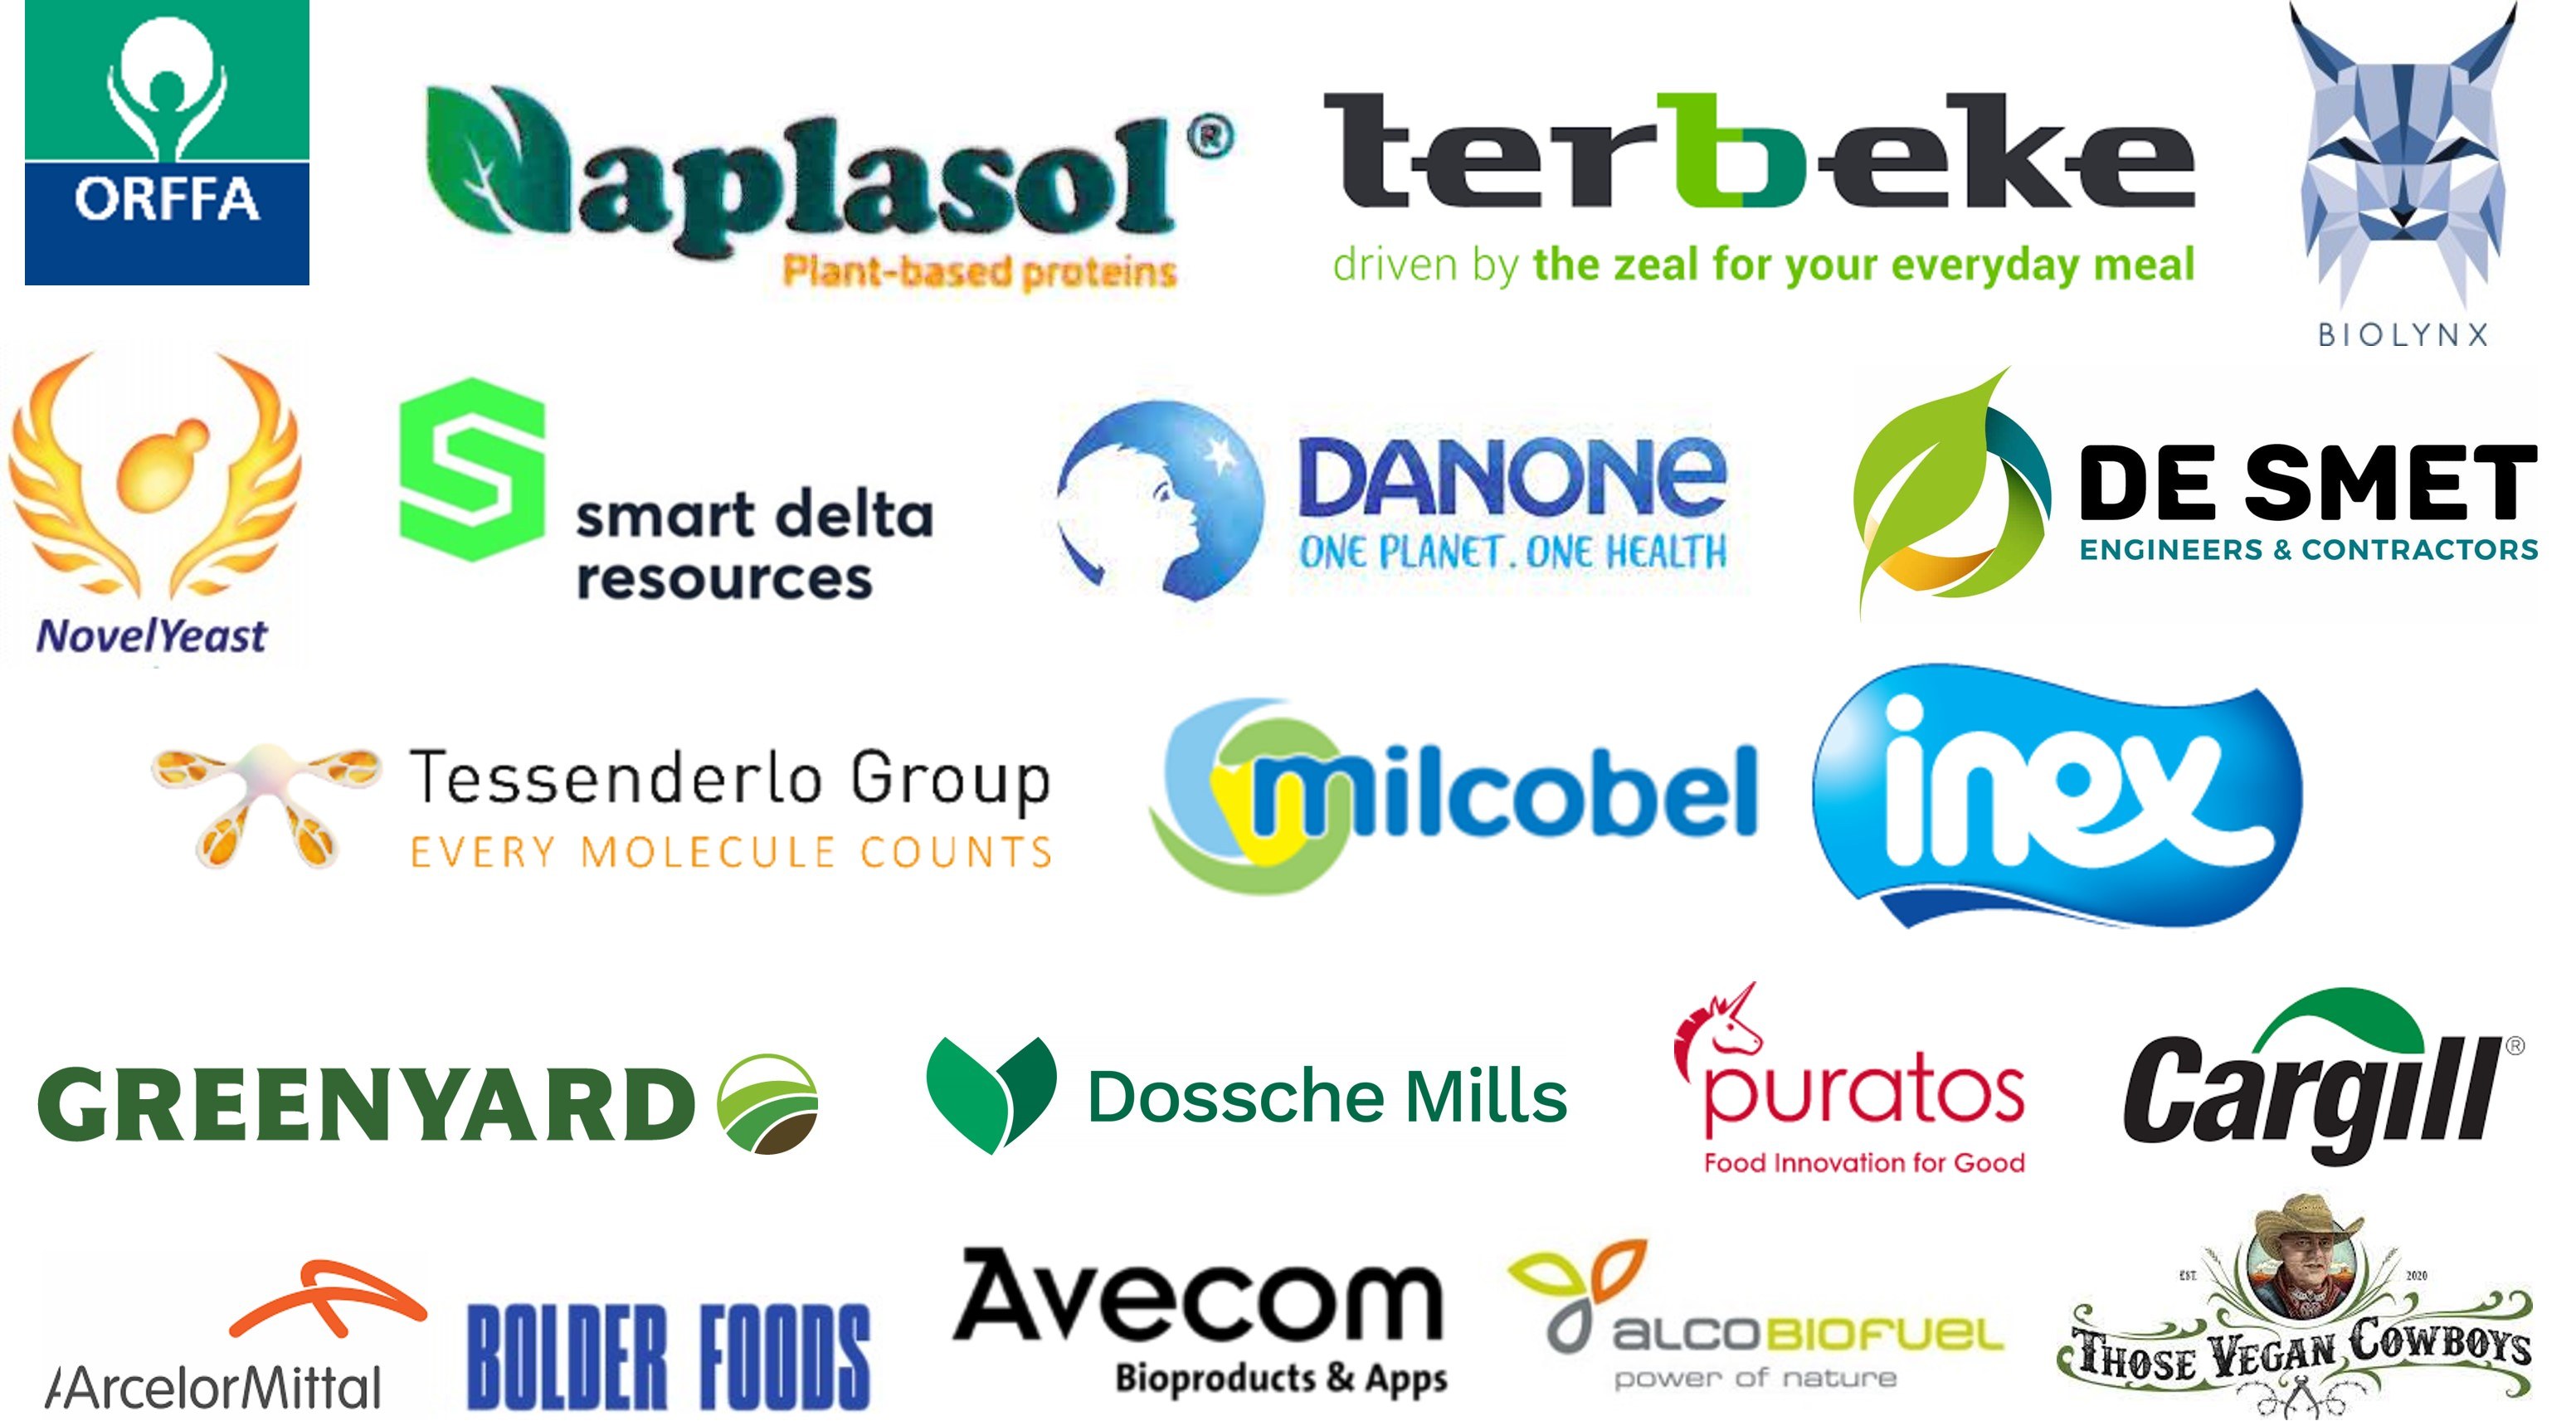 The 20 member-companies that make up the ‘Industrial Sounding Board’ of The ProteInn Club.